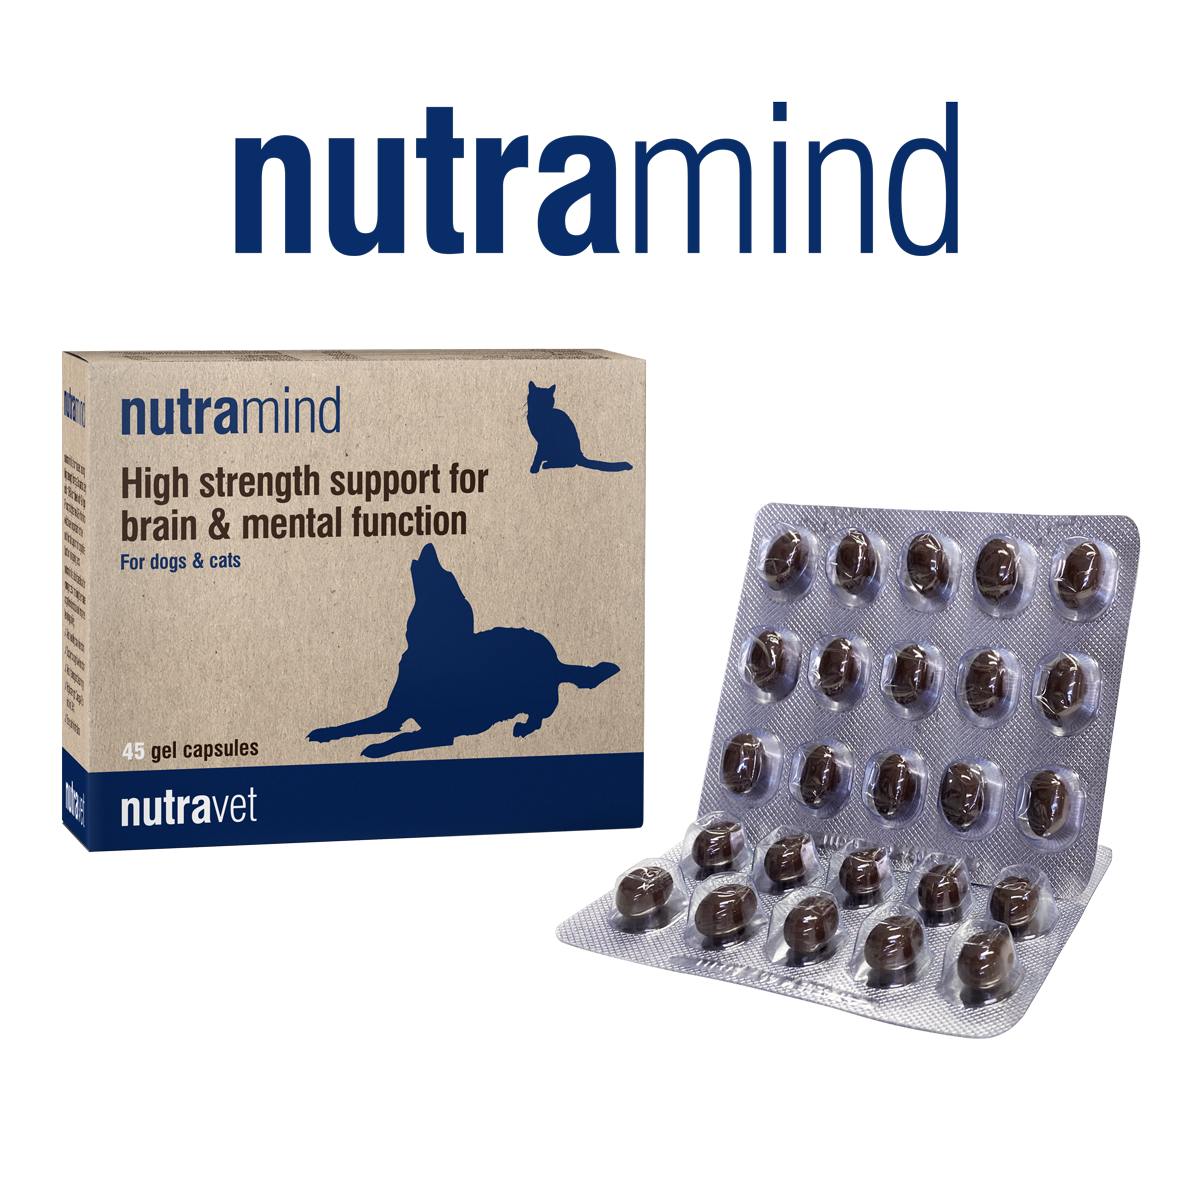 Nutramind (Brain Health Supplement for Dogs & Cats) 45 caps